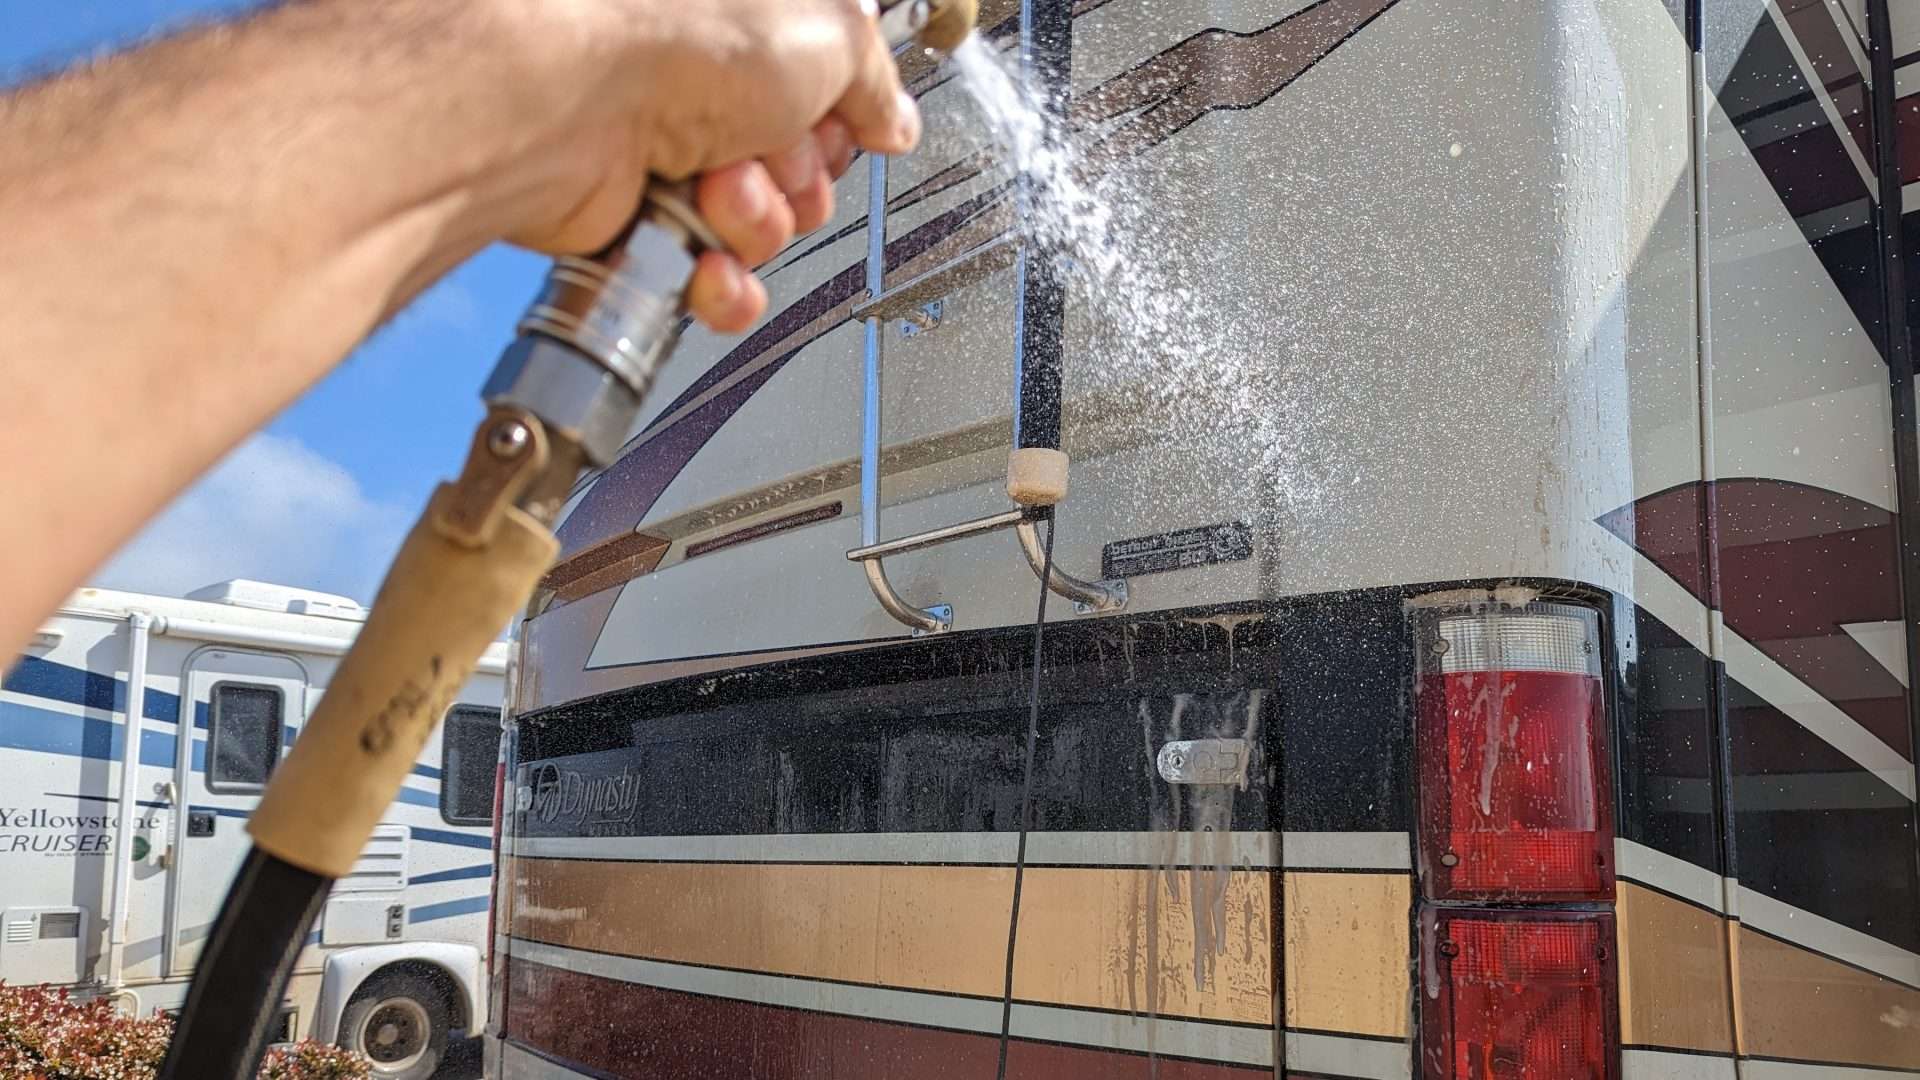 cleaning an RV with dawn